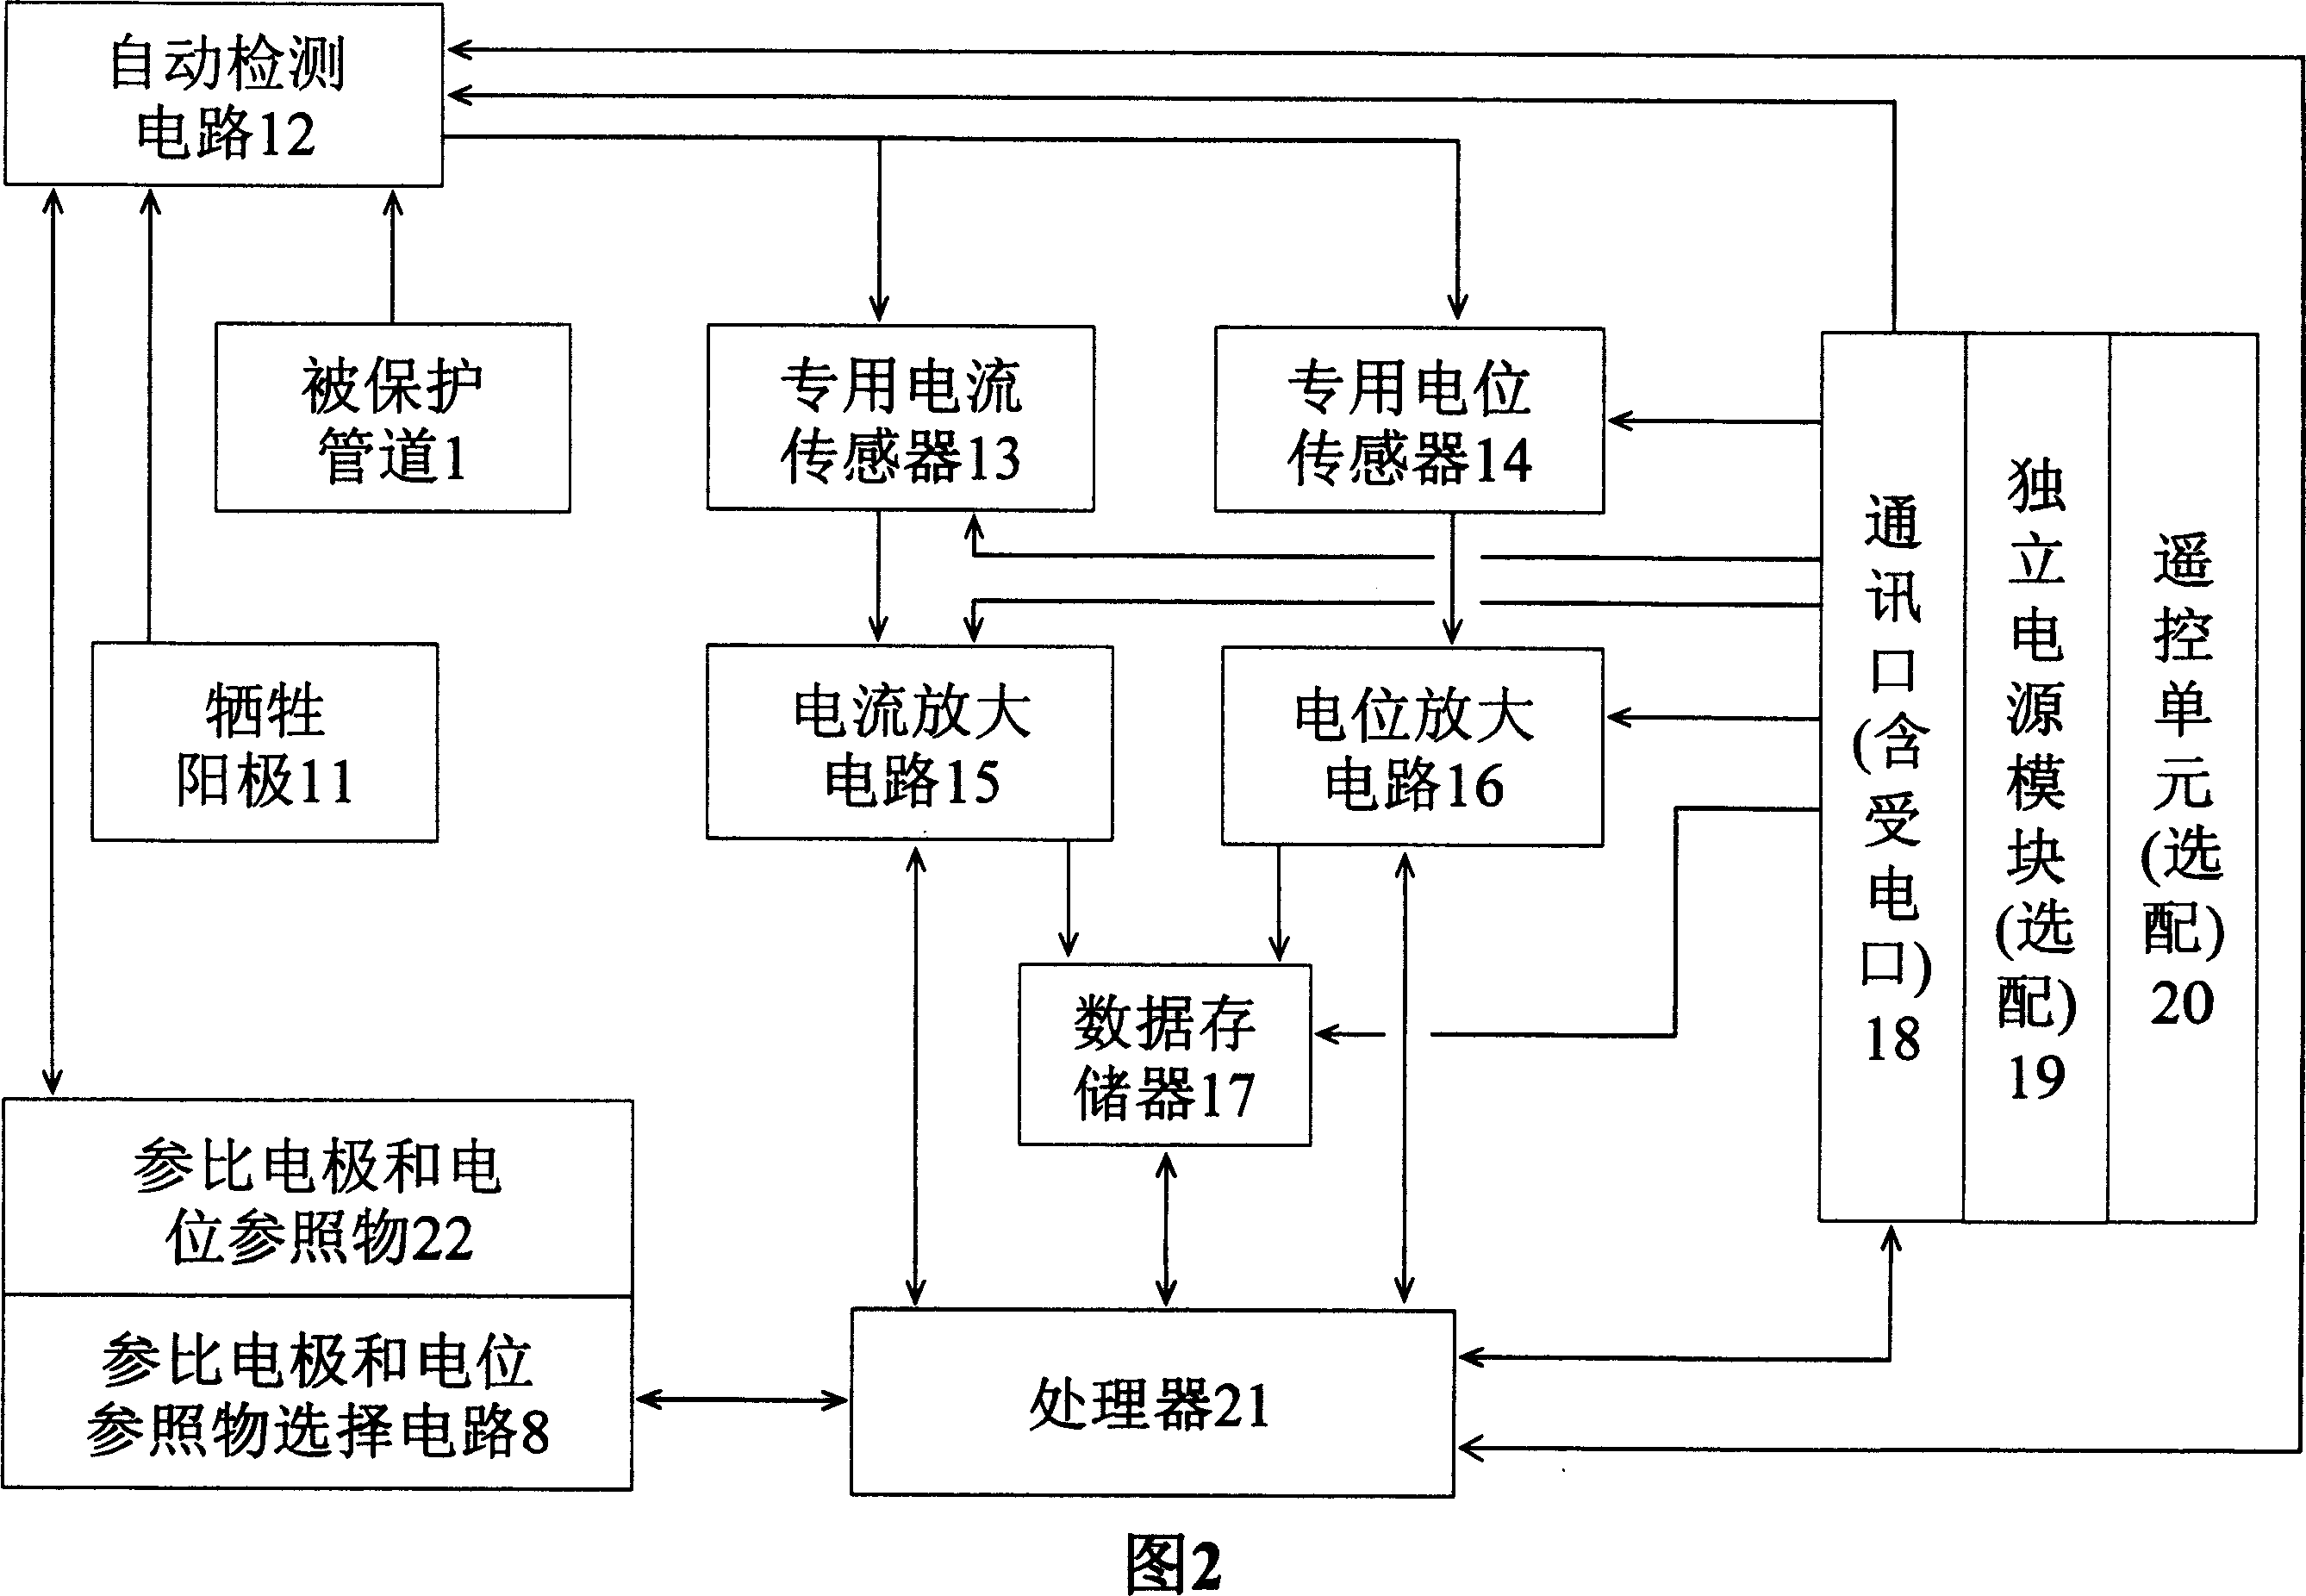 Sacrificial anode or cathod protected automatic detecting and treating system